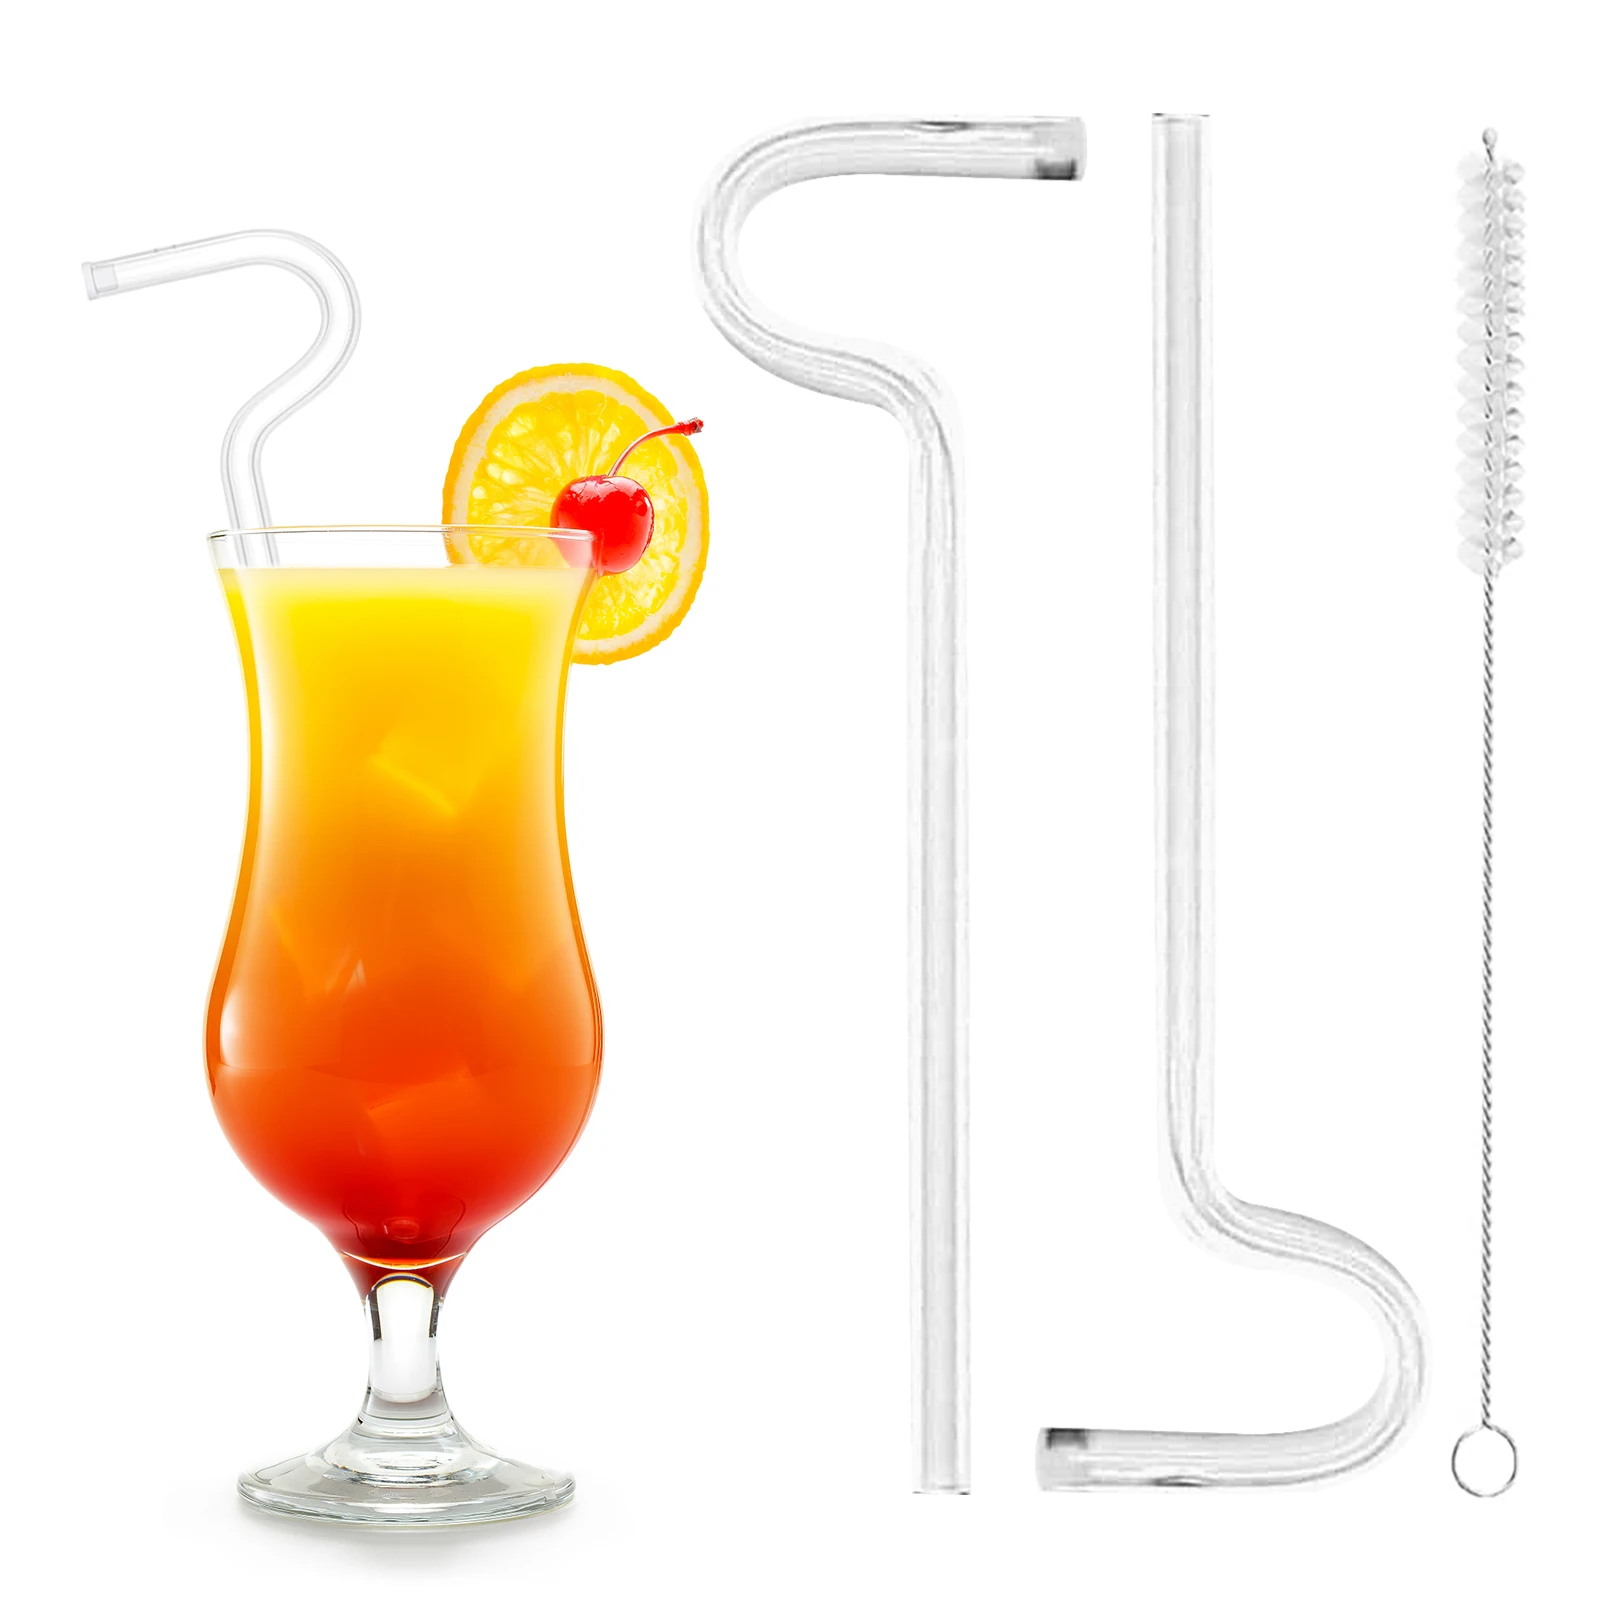 

3pcs/set Sideway Coffee Anti Wrinkle Straw Durable Juice With Cleaning Brush Curved Portable Reusable Glass Lip Care Drinking